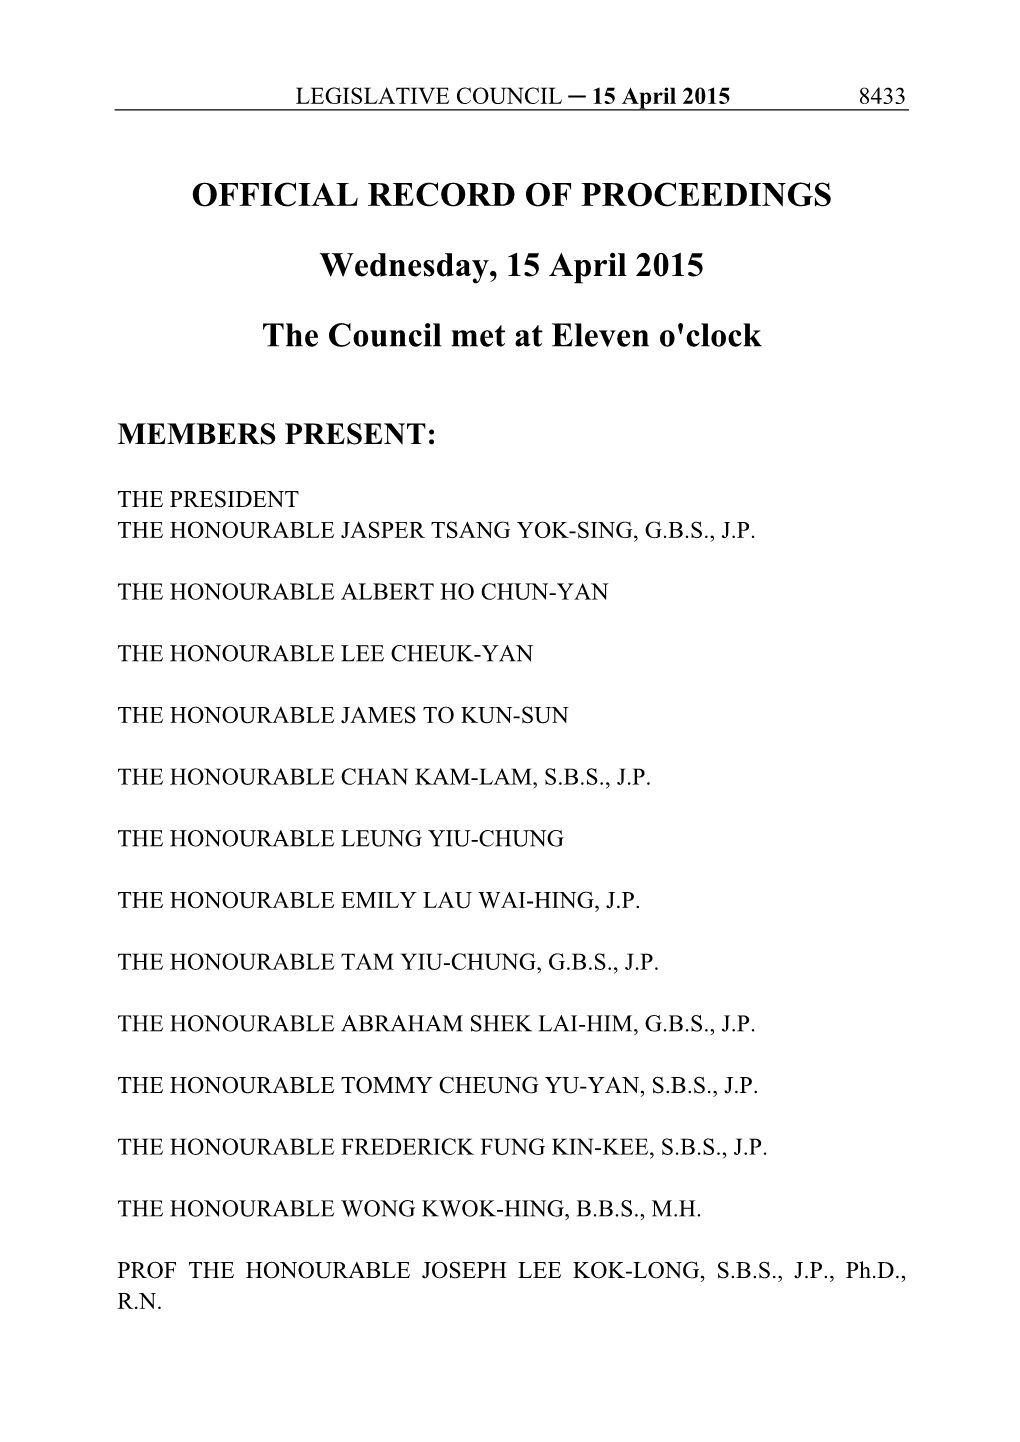 OFFICIAL RECORD of PROCEEDINGS Wednesday, 15